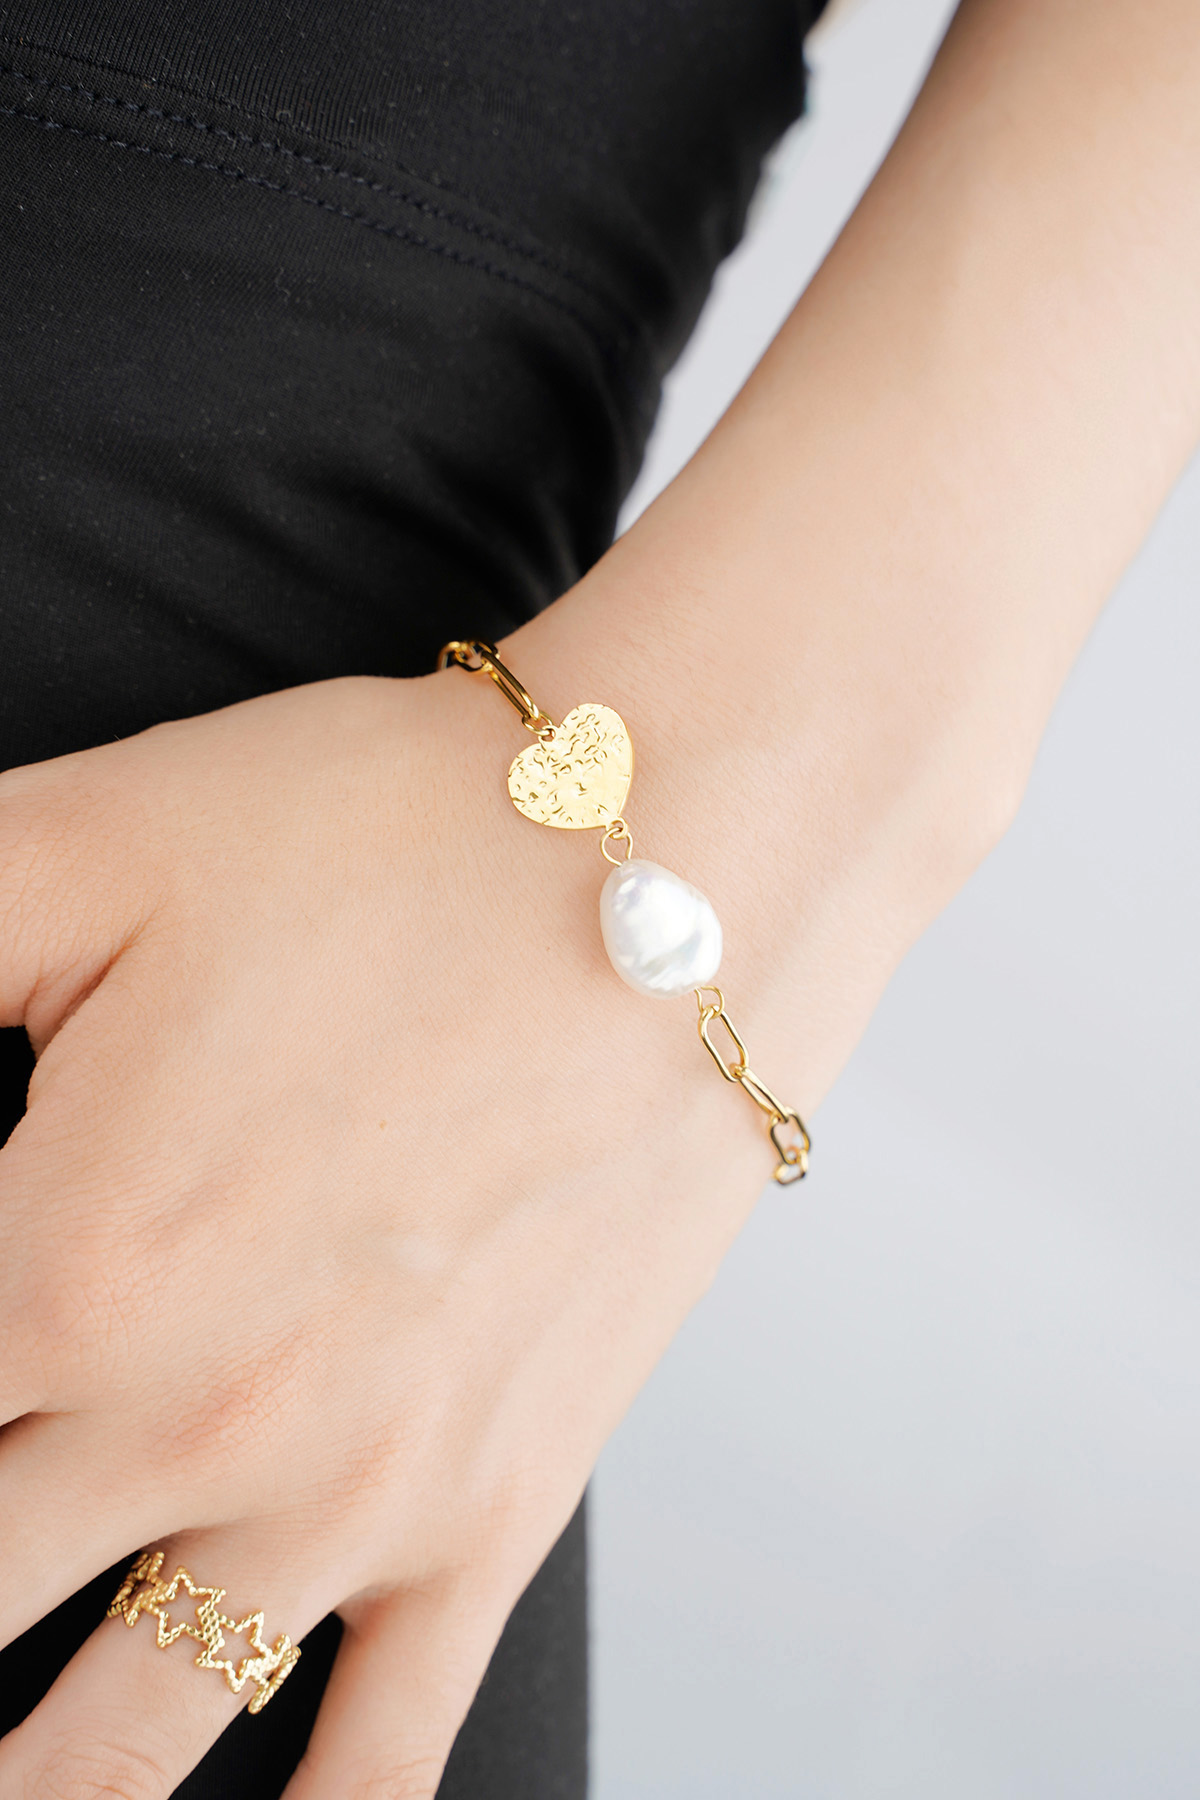 Armband amour toujours - goud Afbeelding3